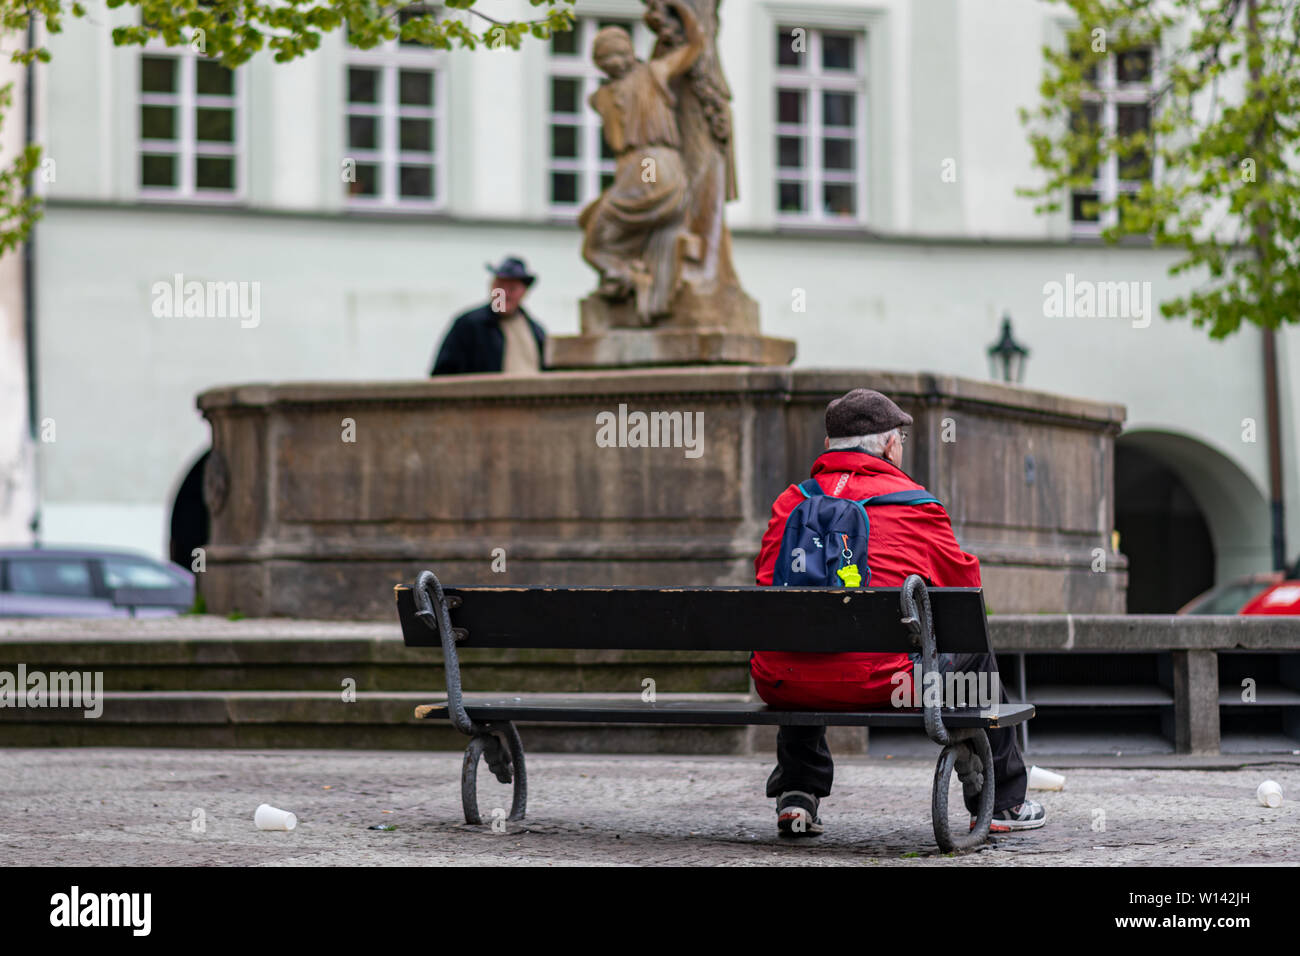 PRAGUE, CZECH REPUBLIC - 12TH APRIL 2019: A lone elderly male man sits on a bench in front of a statue in the middle of Prague Capital City Stock Photo